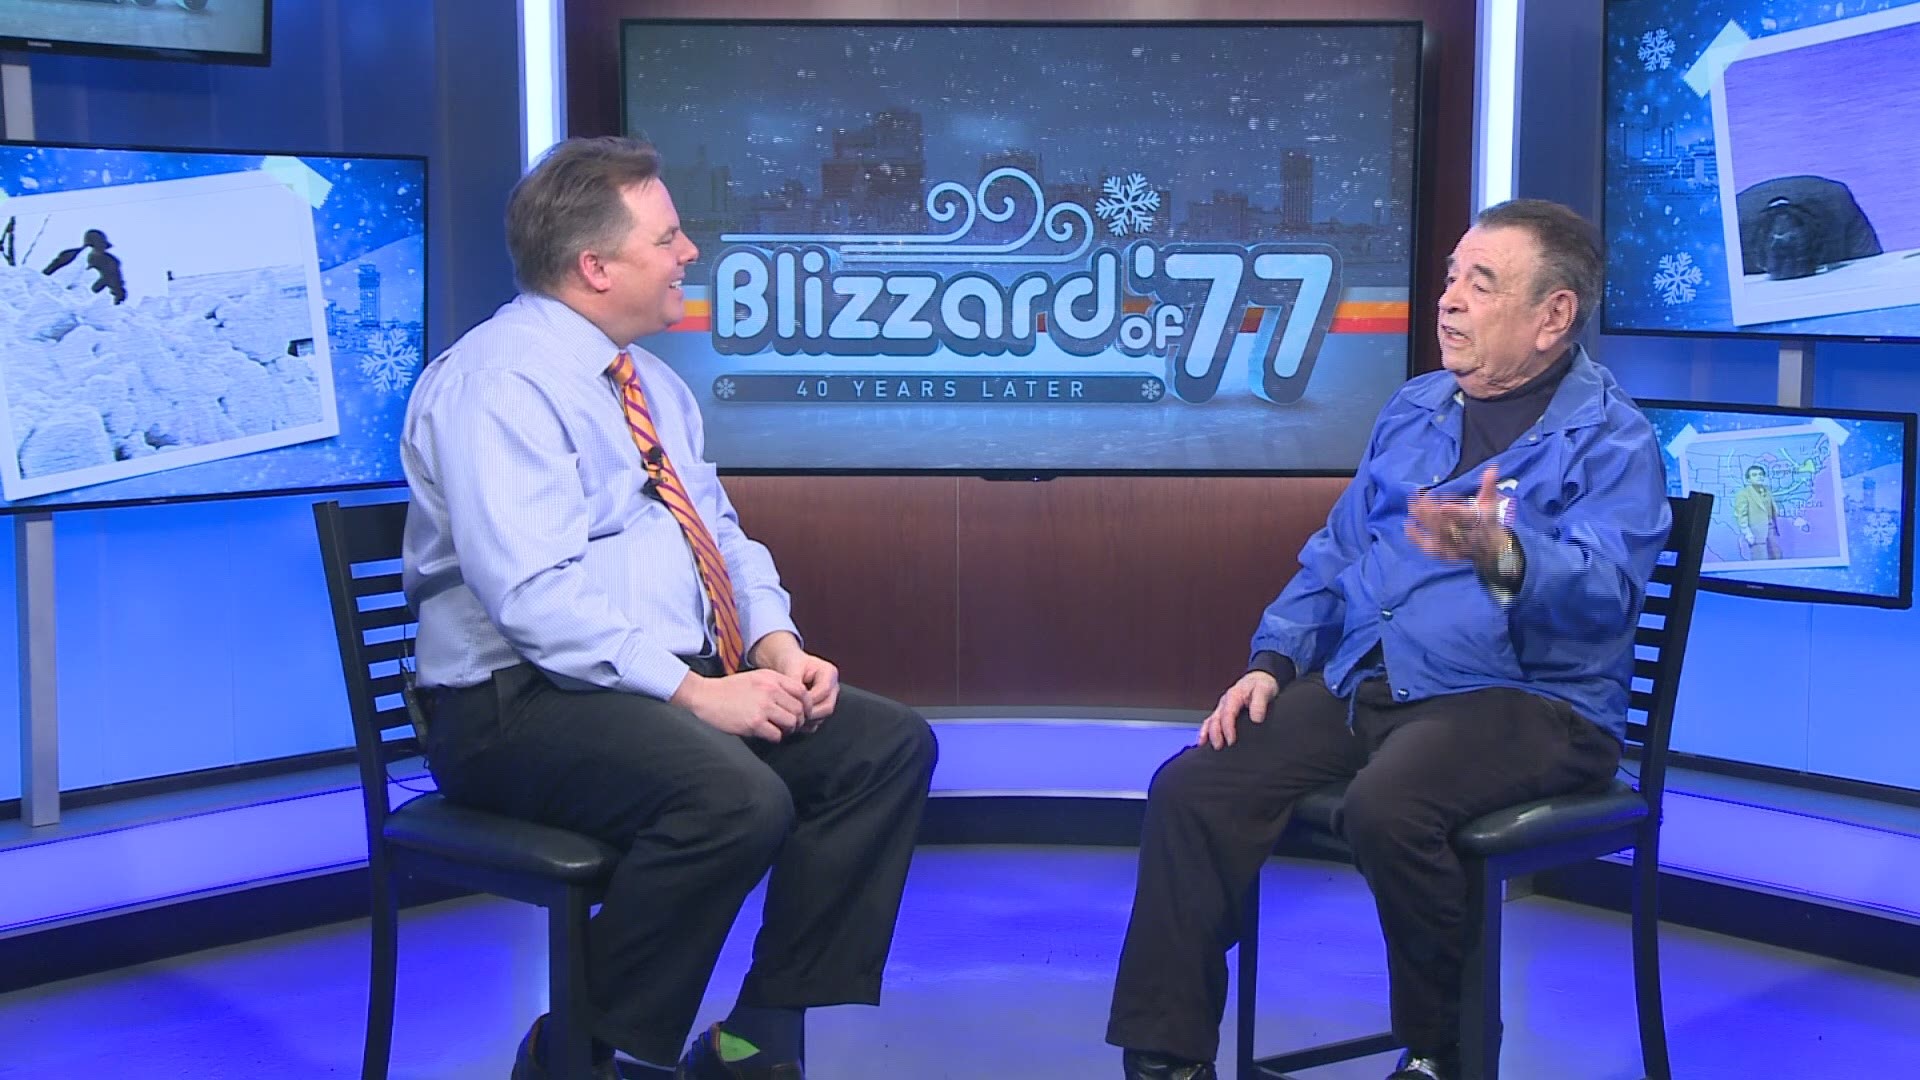 Barry Lillis remembers the Blizzard of 77 in Buffalo, NY